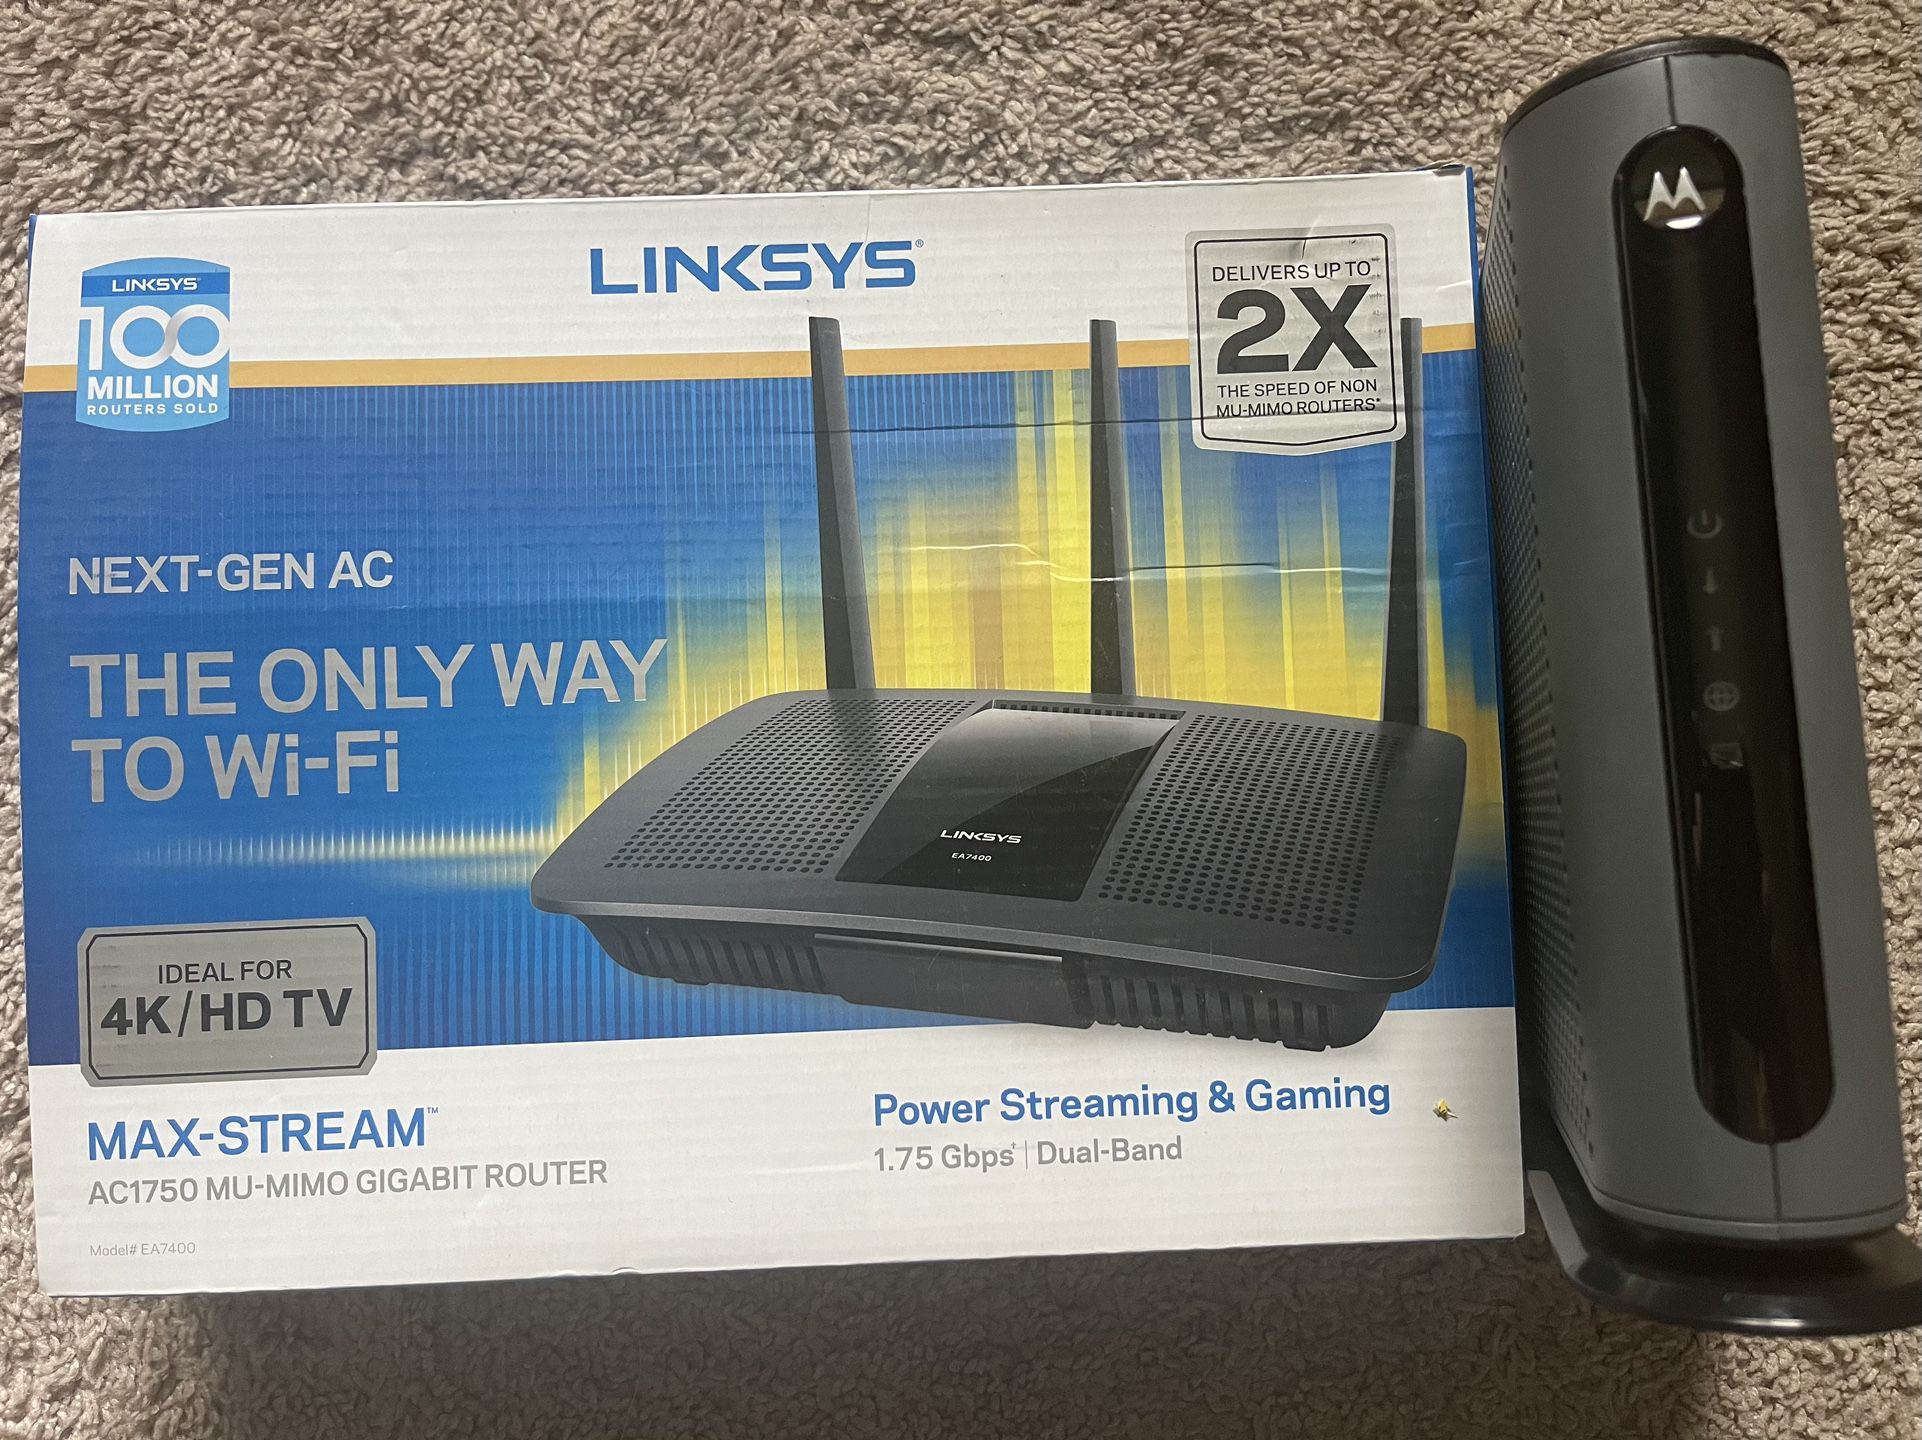 Motorola DOCSIS 3.1 Cable Modem and Linksys Max-Stream